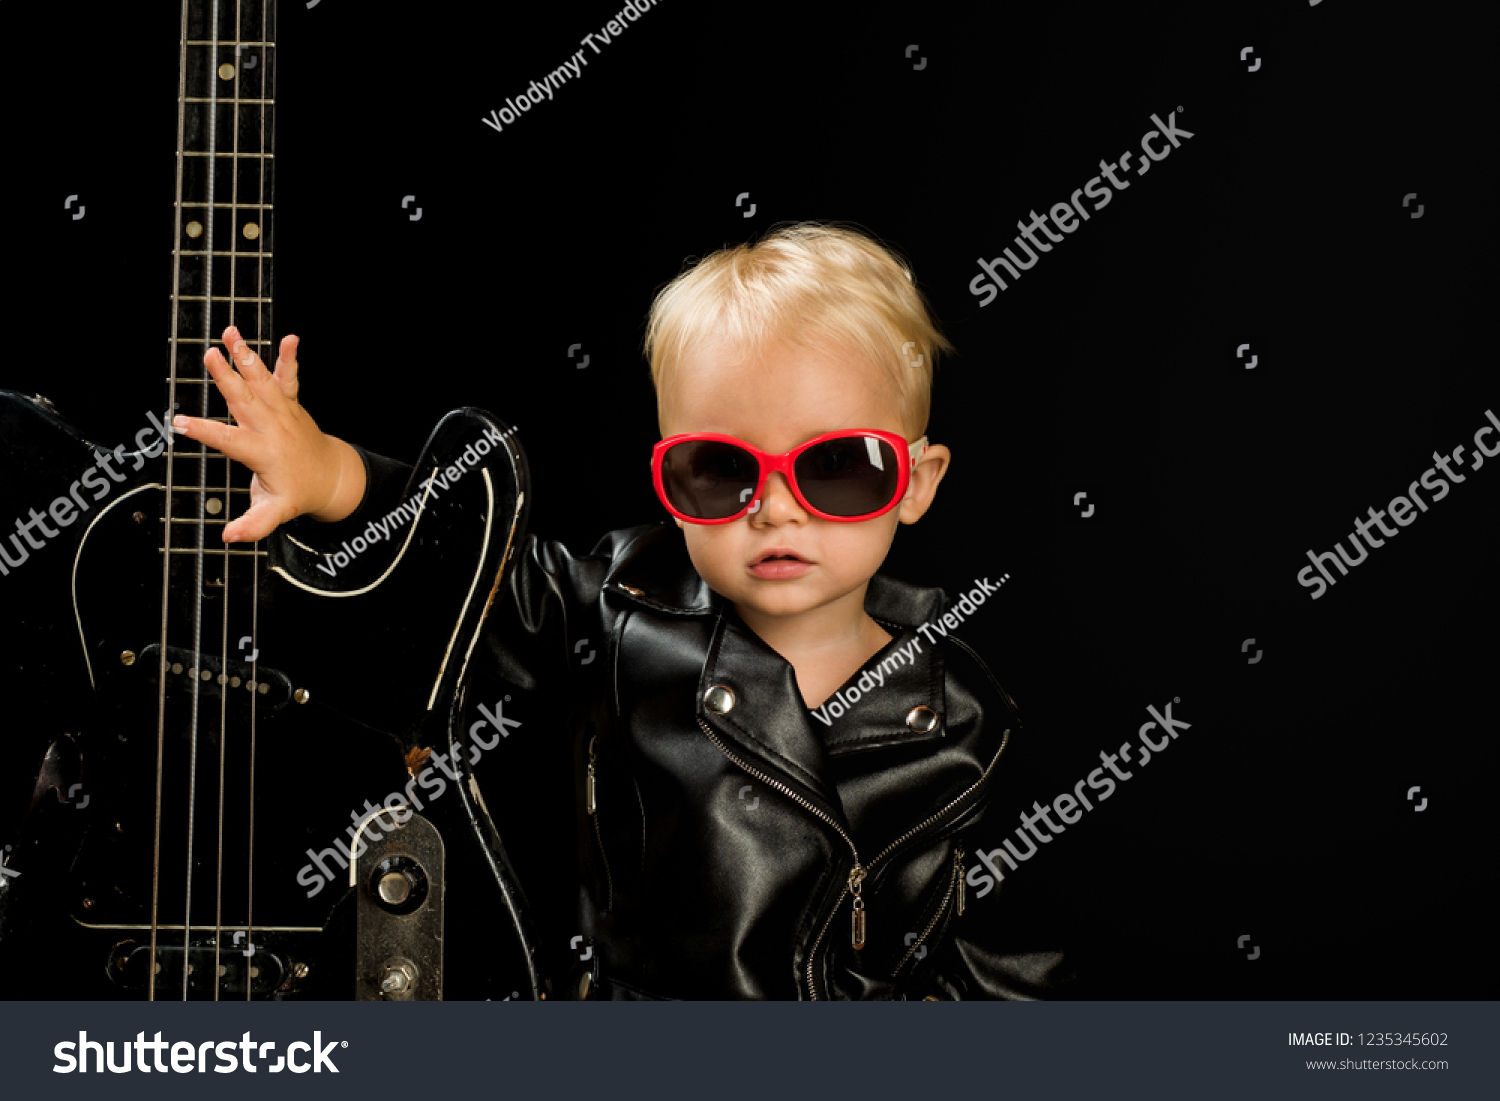 Music for everyone. Adorable small music fan. Small musician. Little rock star. Child boy with guitar. Little guitarist in rocker jacket. Rock style child. Rock and roll music performer. #1235345602